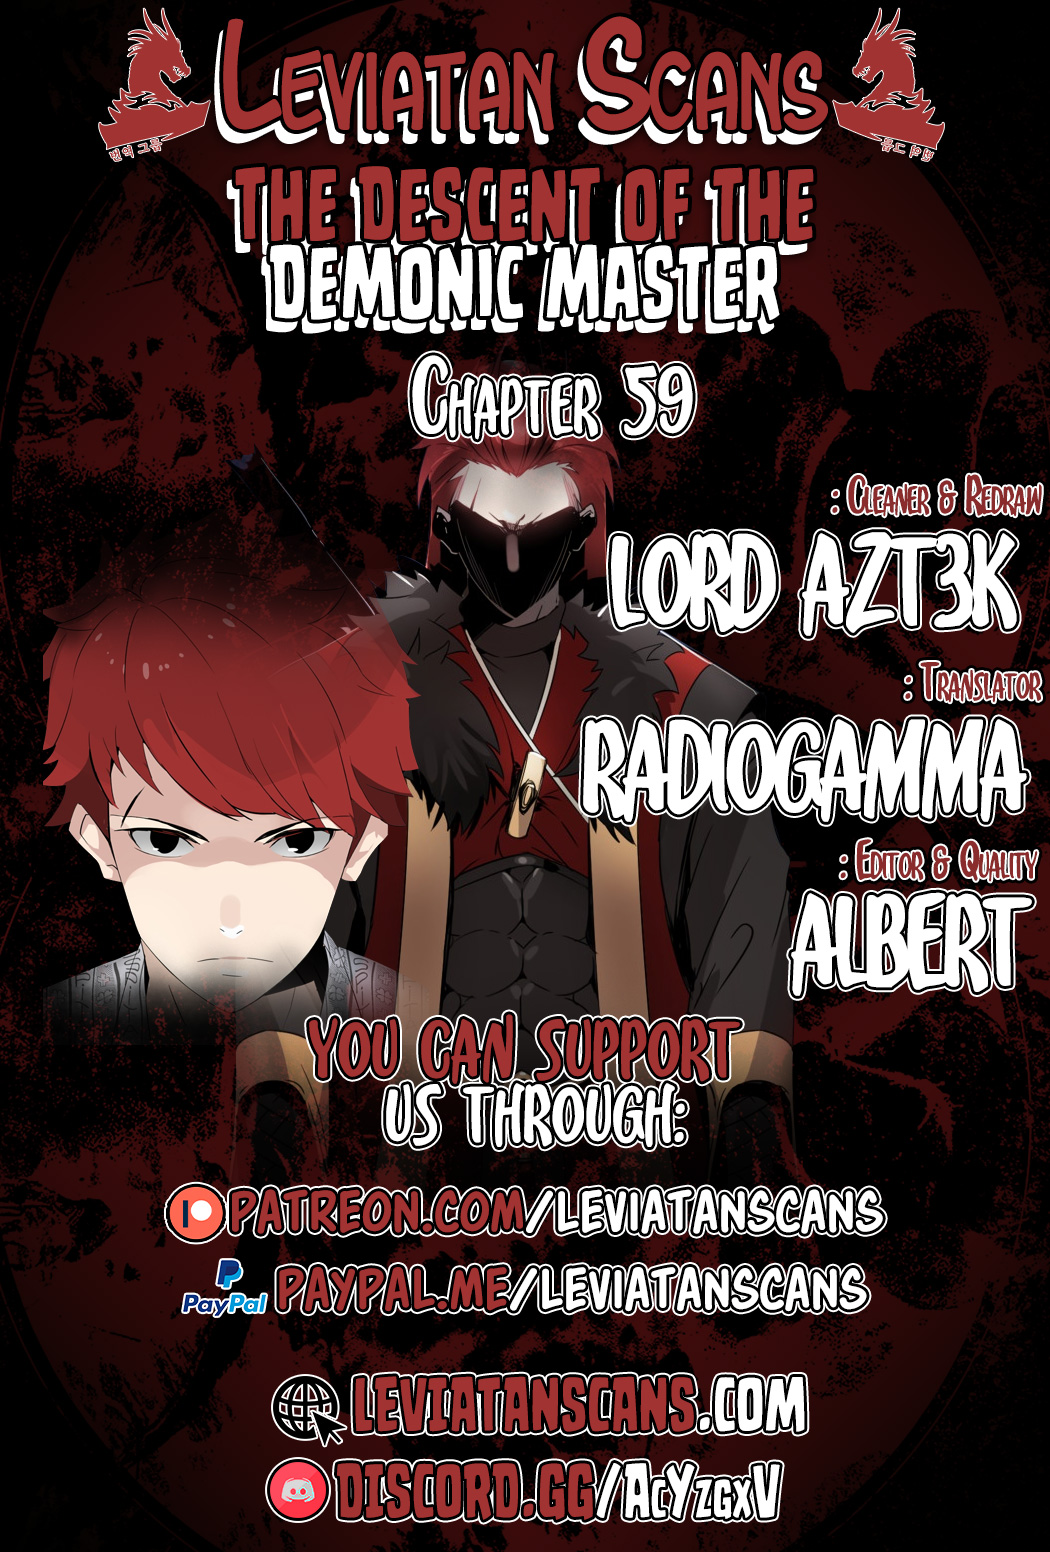 The Descent of the Demonic Master 59 (1)